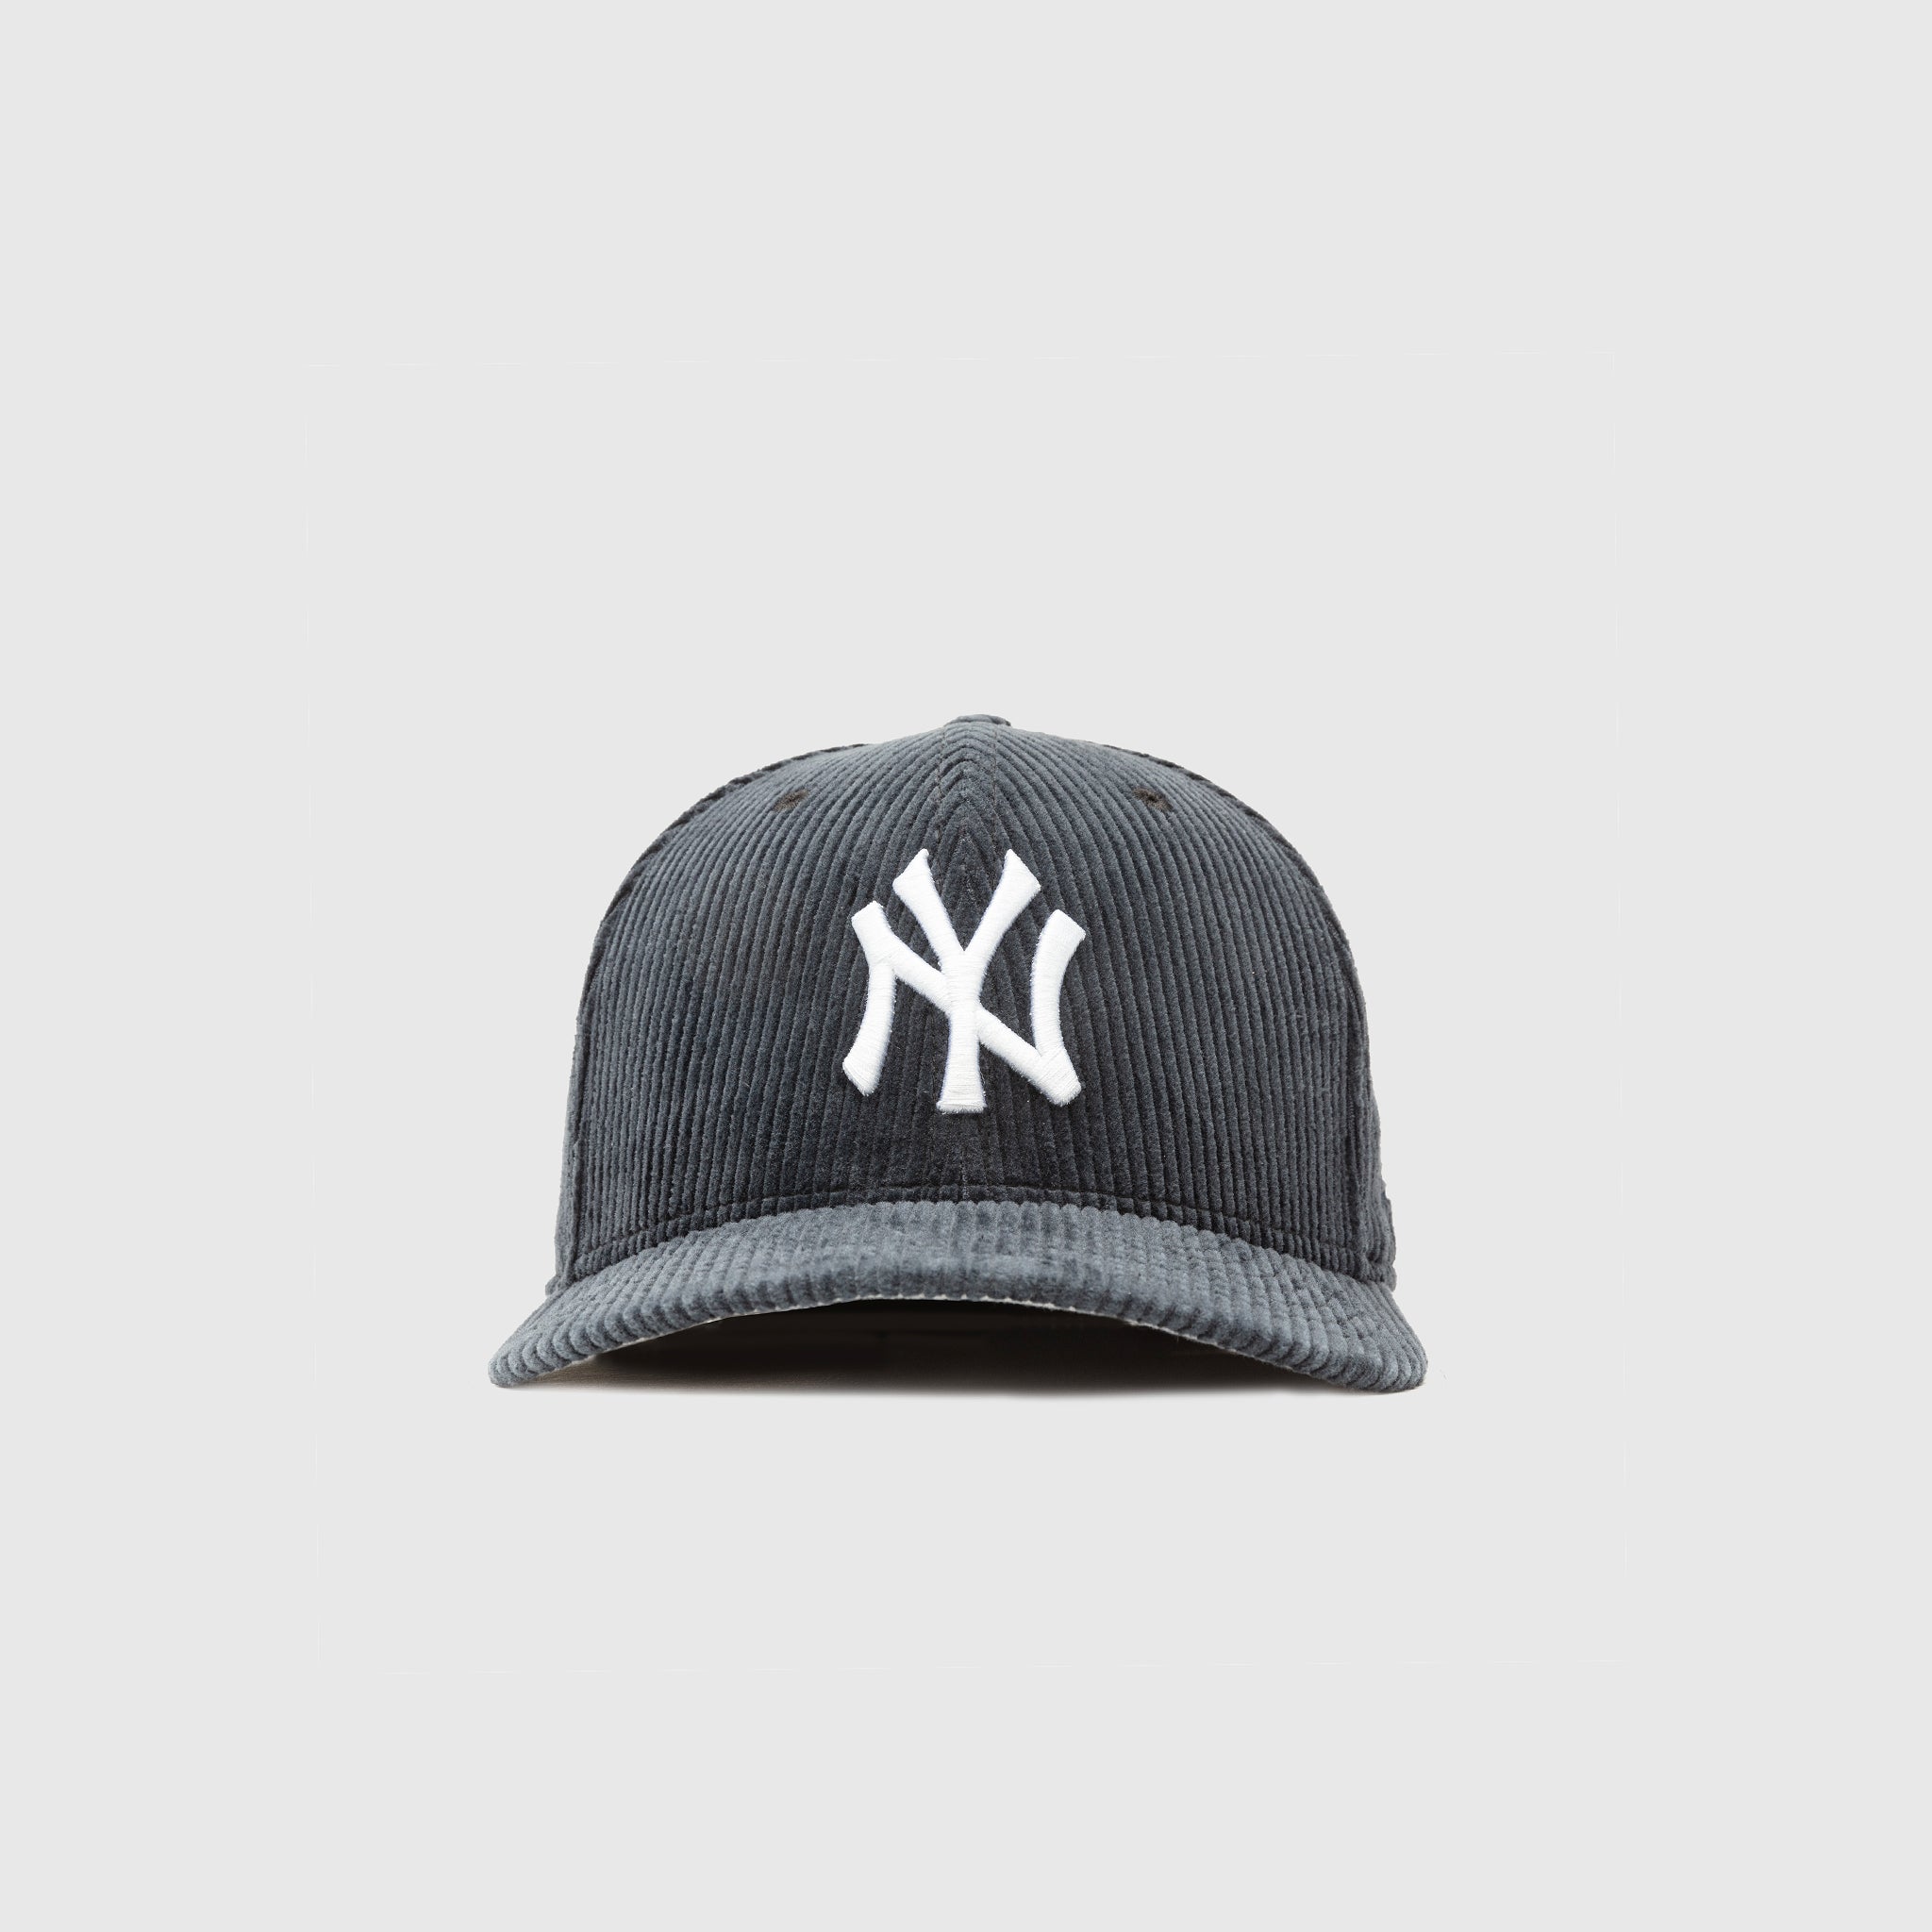 JuzsportsShops X NEW ERA NEW YORK YANKEES 59FIFTY FITTED "CORD"